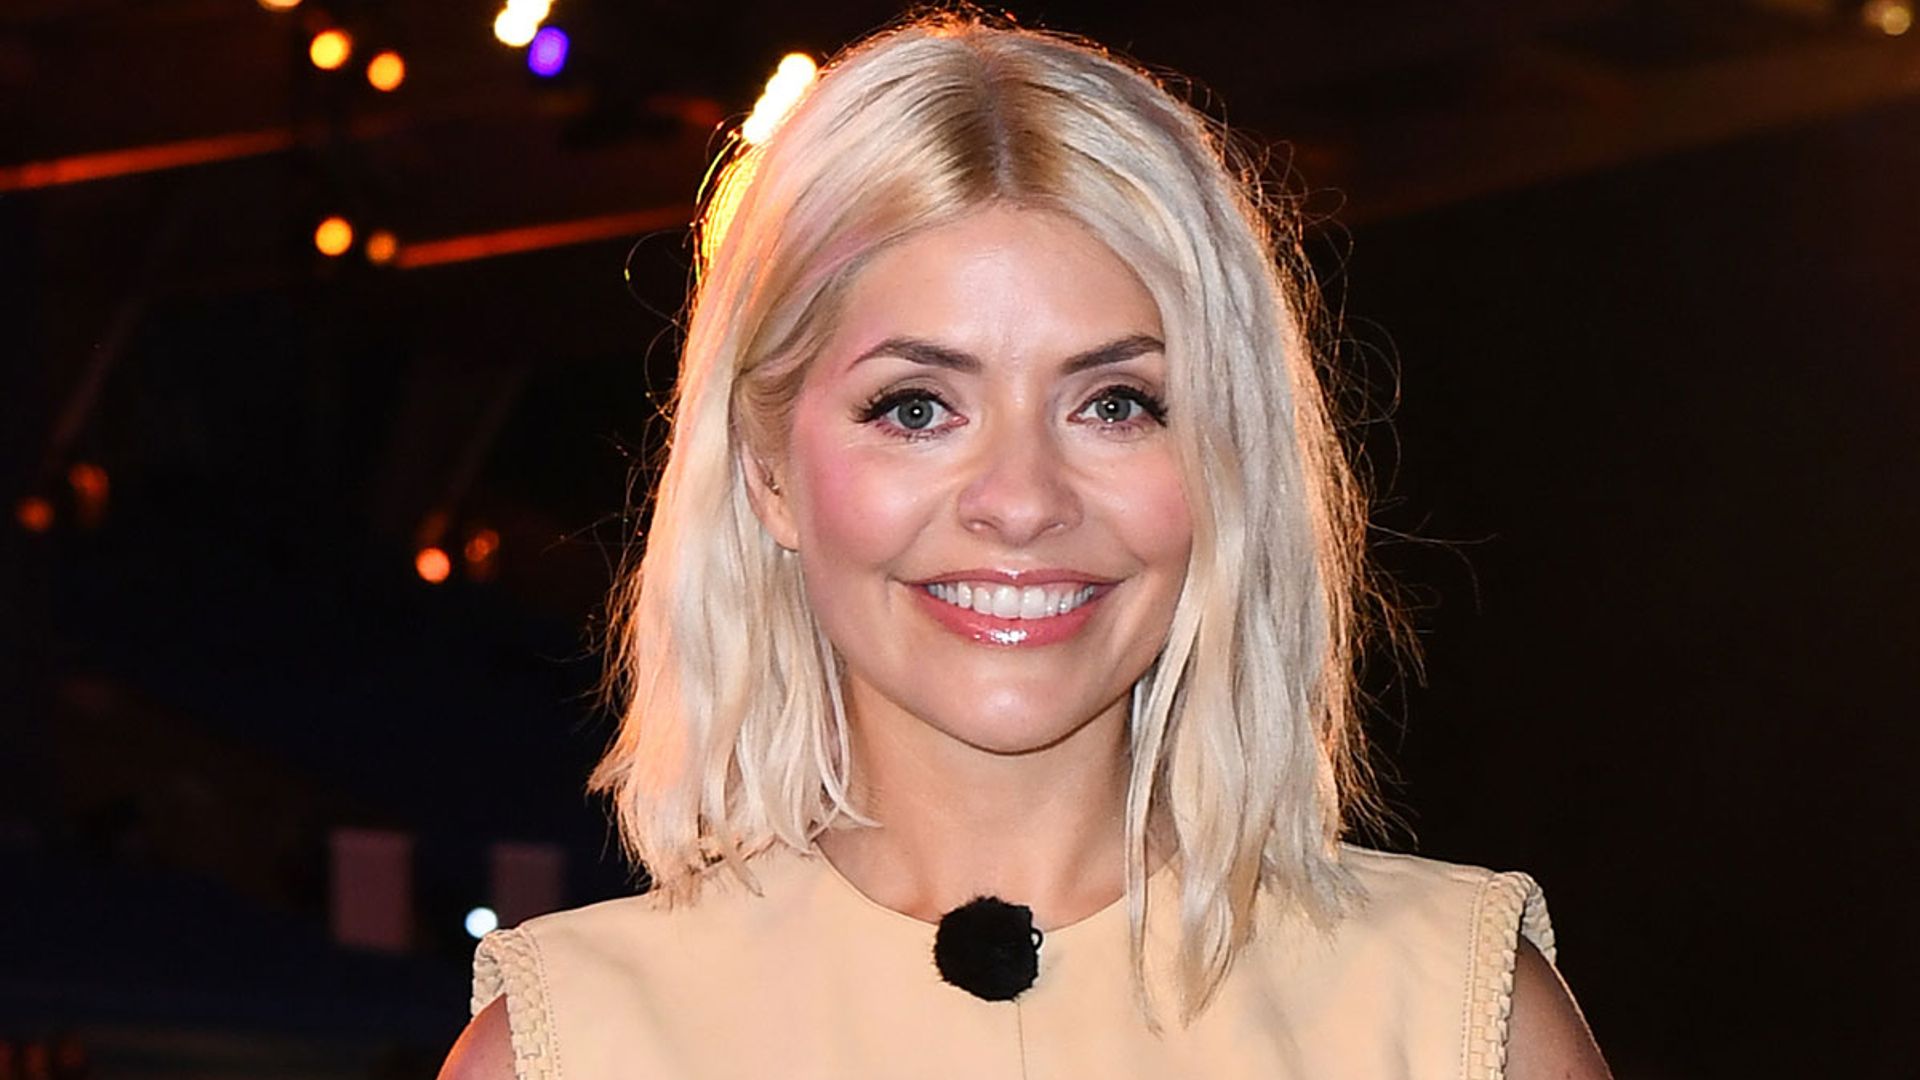 Holly Willoughby debuts striking new jewellery in stunning selfie